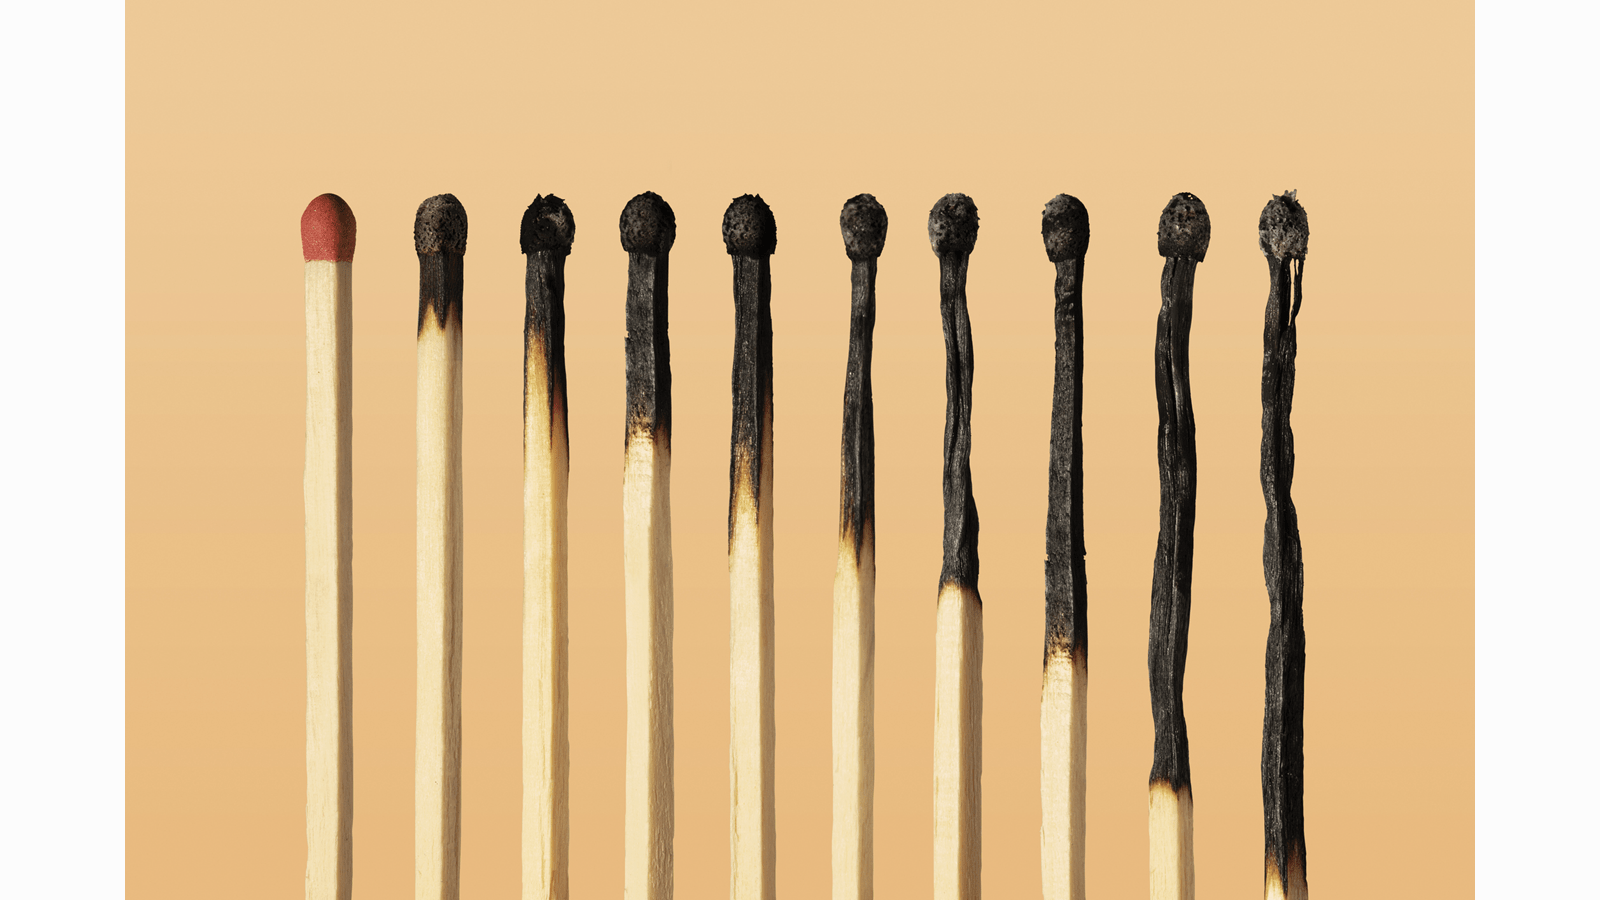 A line of increasingly burned out matches